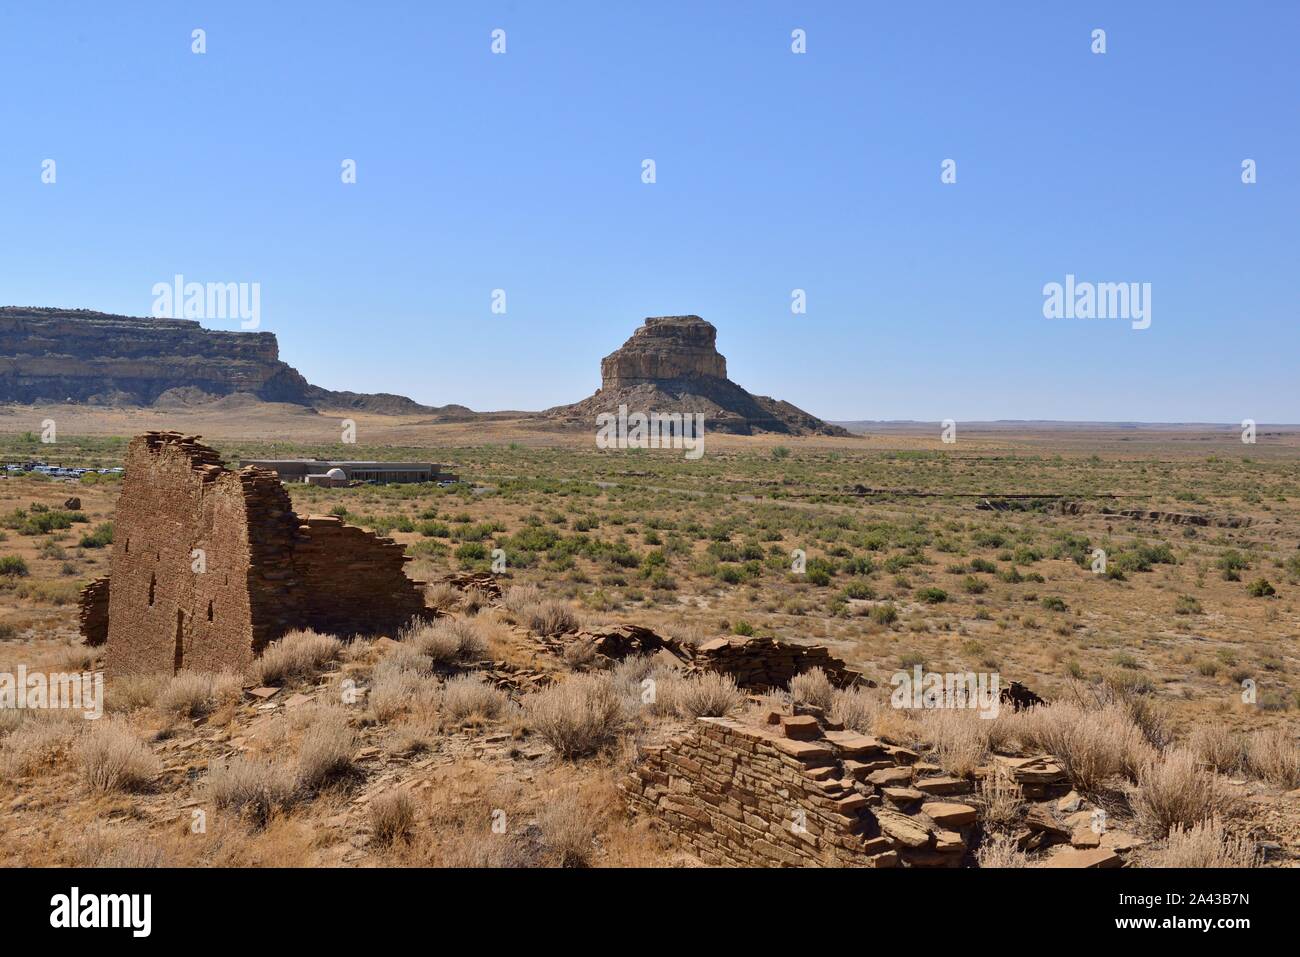 Fajada Butte and the Visitor Center in the background, Una Vida (850-1250s), Chaco Canyon, NM 190912 61335 Stock Photo